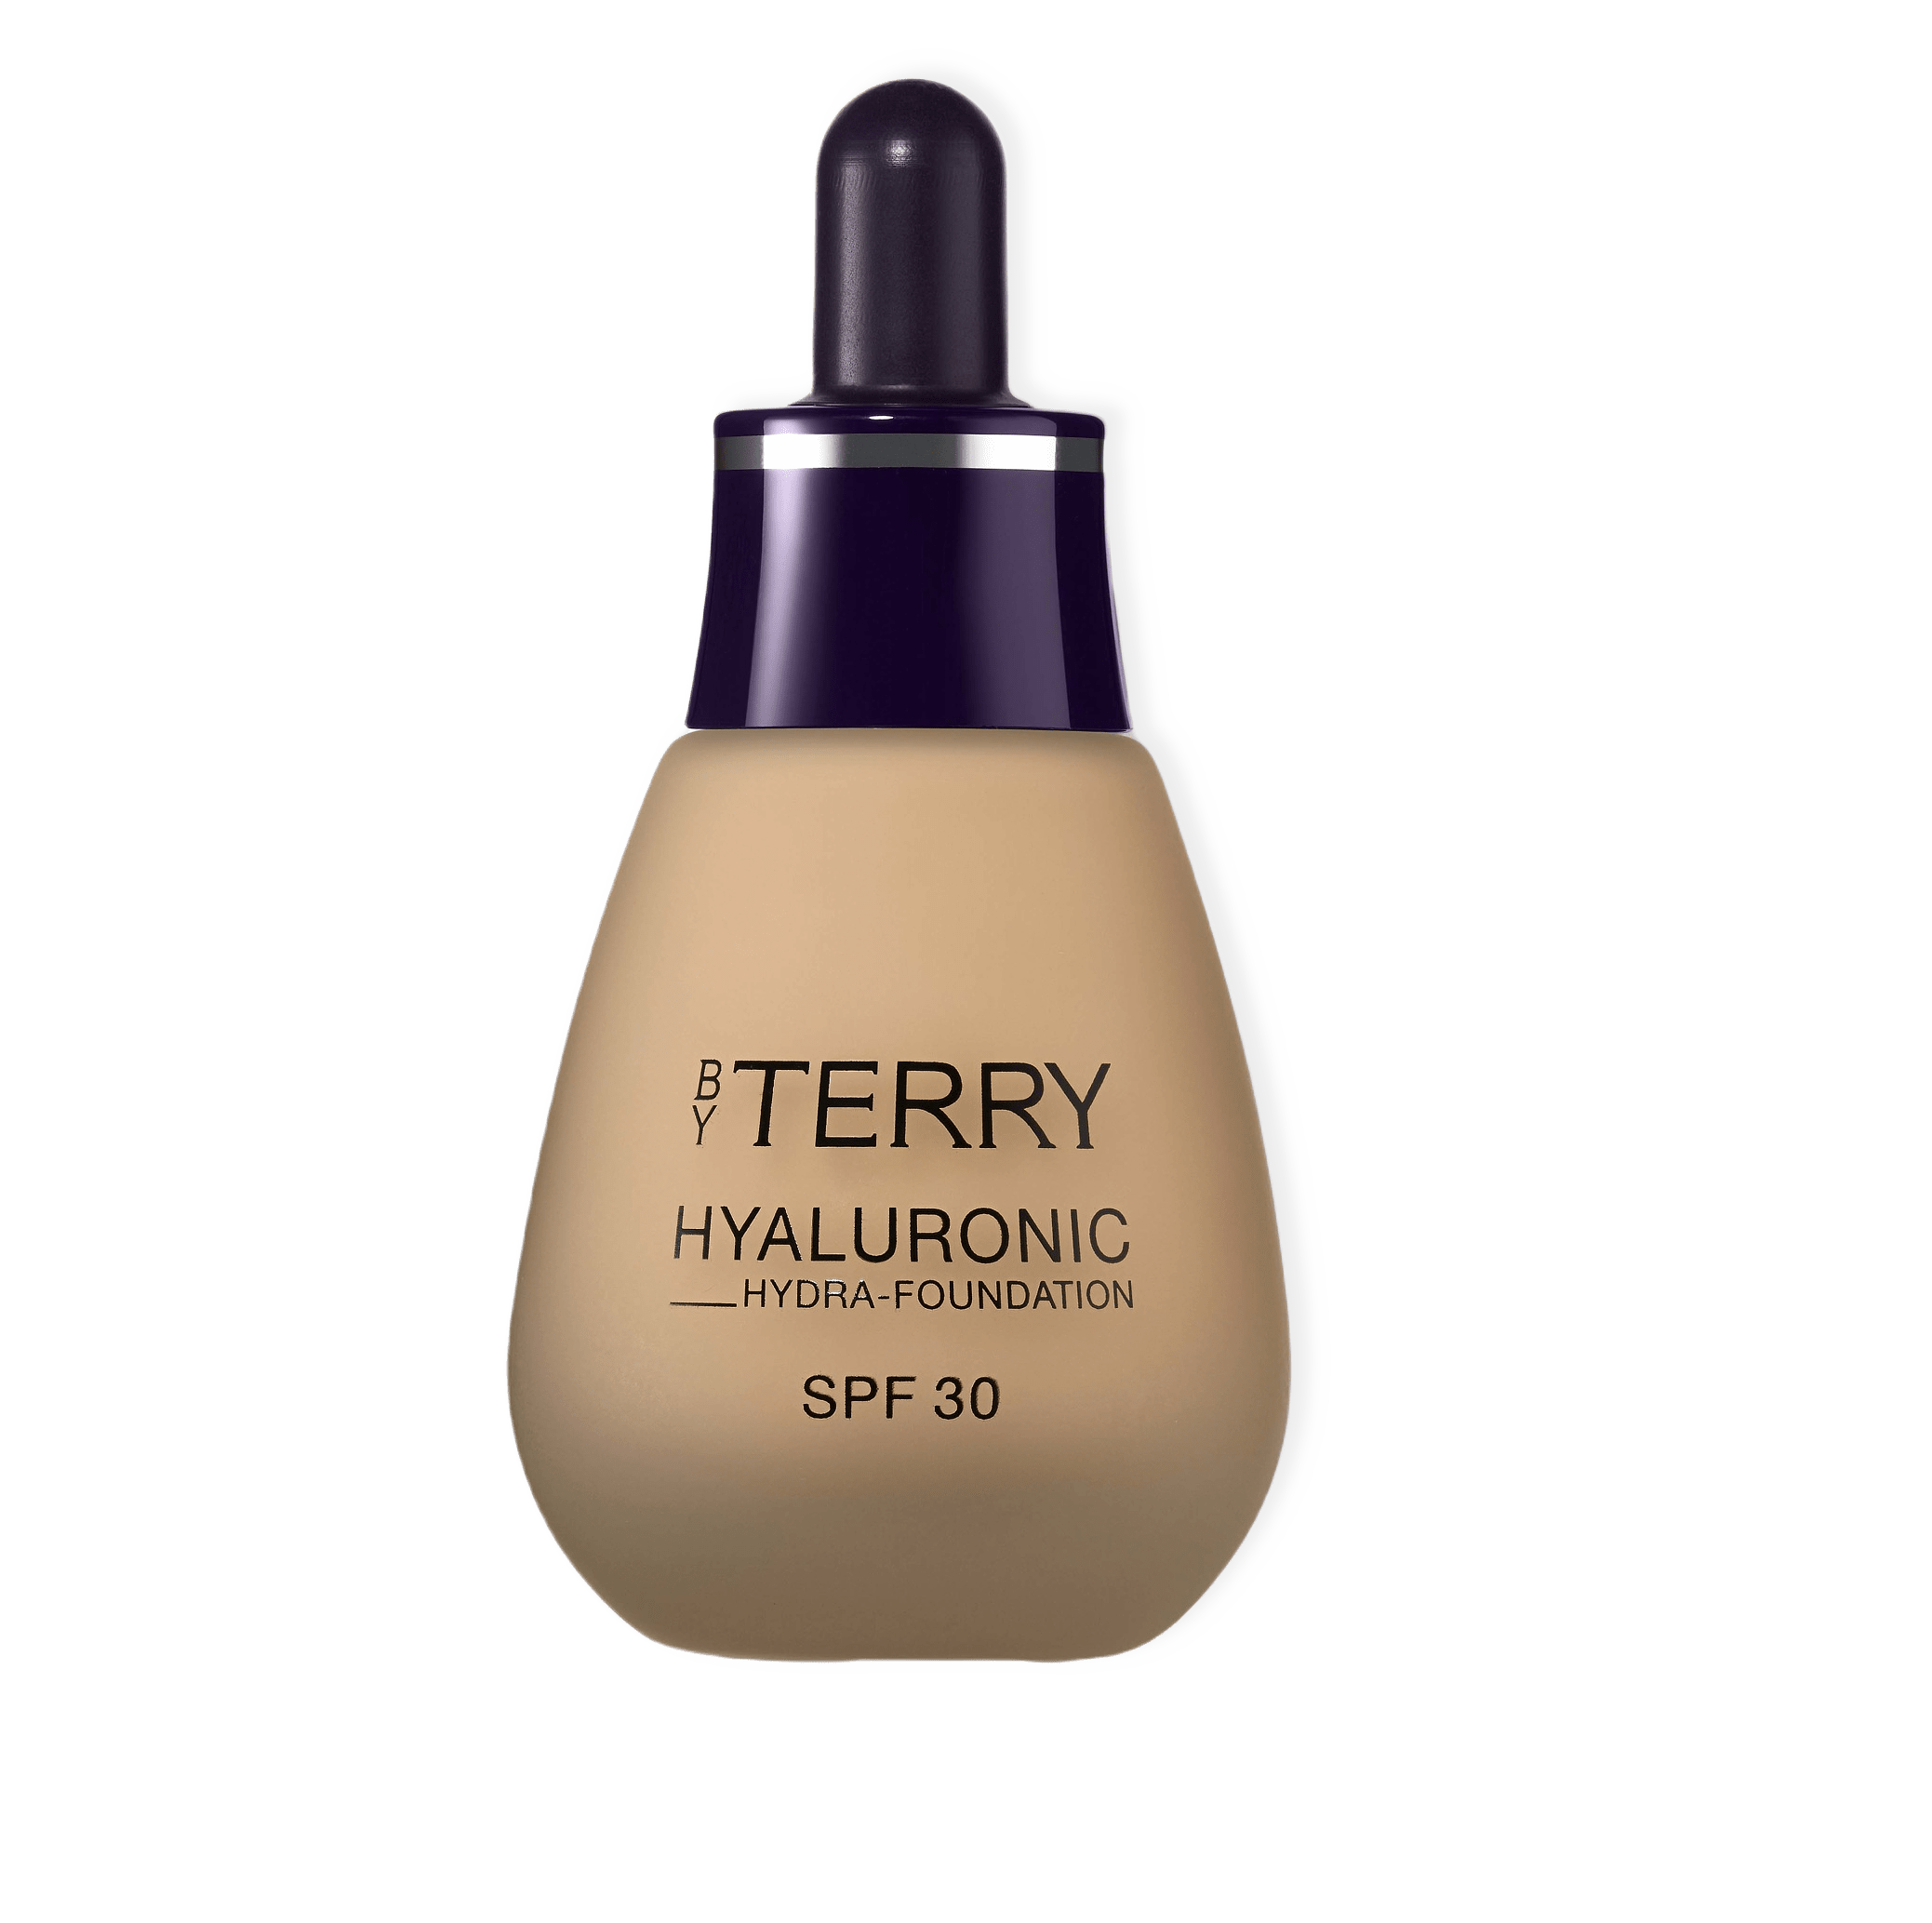 Hyaluronic Hydra-Foundation från By Terry